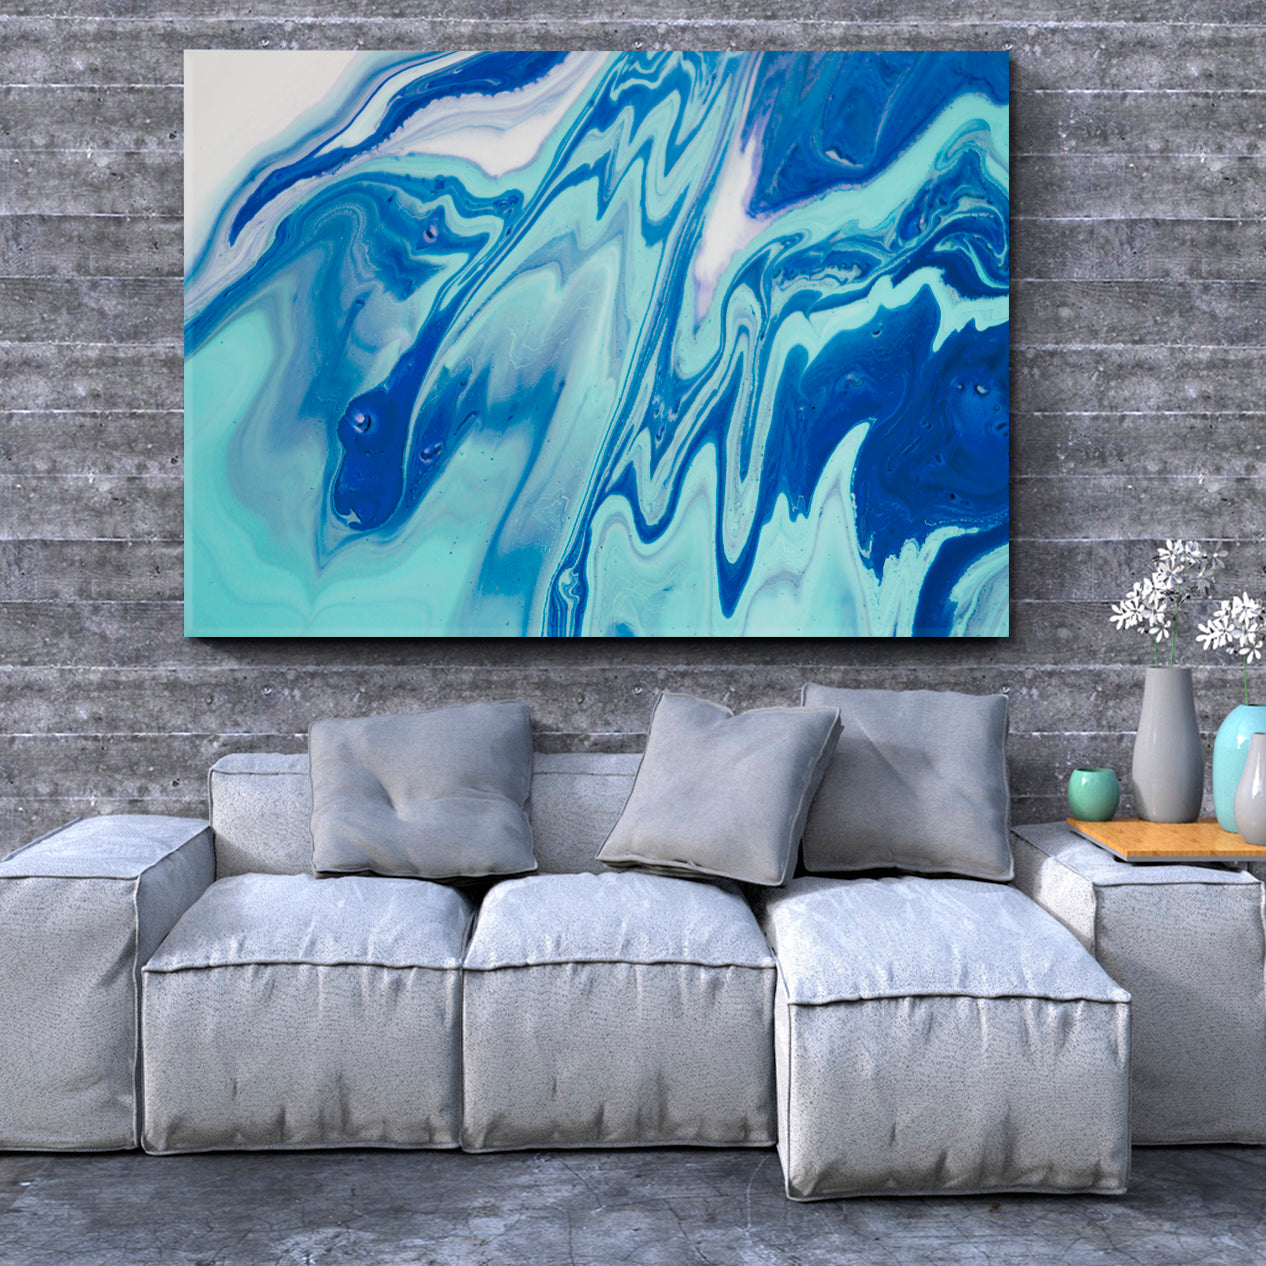 Blue Marble Art Water Abstract Liquid Painting Modern Pattern Texture  Artwork Framed Canvas Print Wall Art Office Decor Home Decorations 